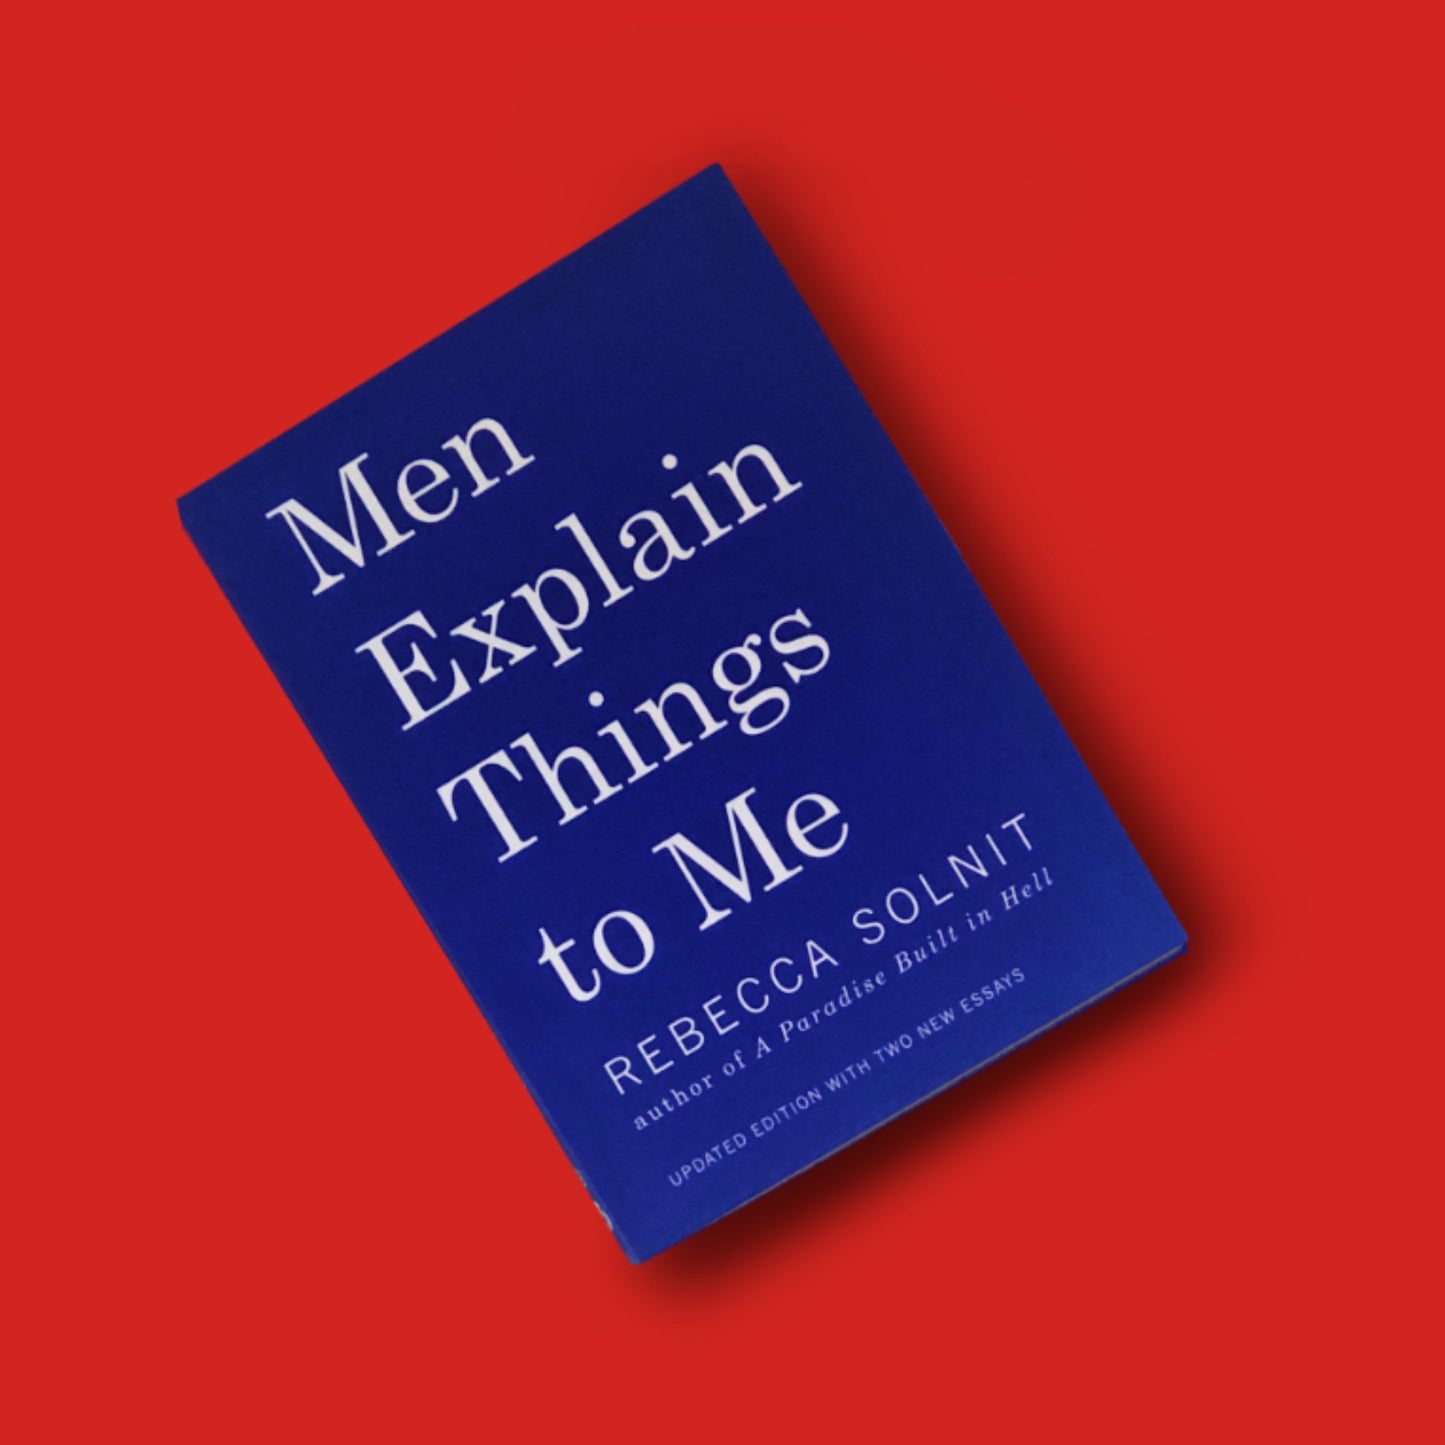 Men Explain Things To Me, by Rebecca Solnit